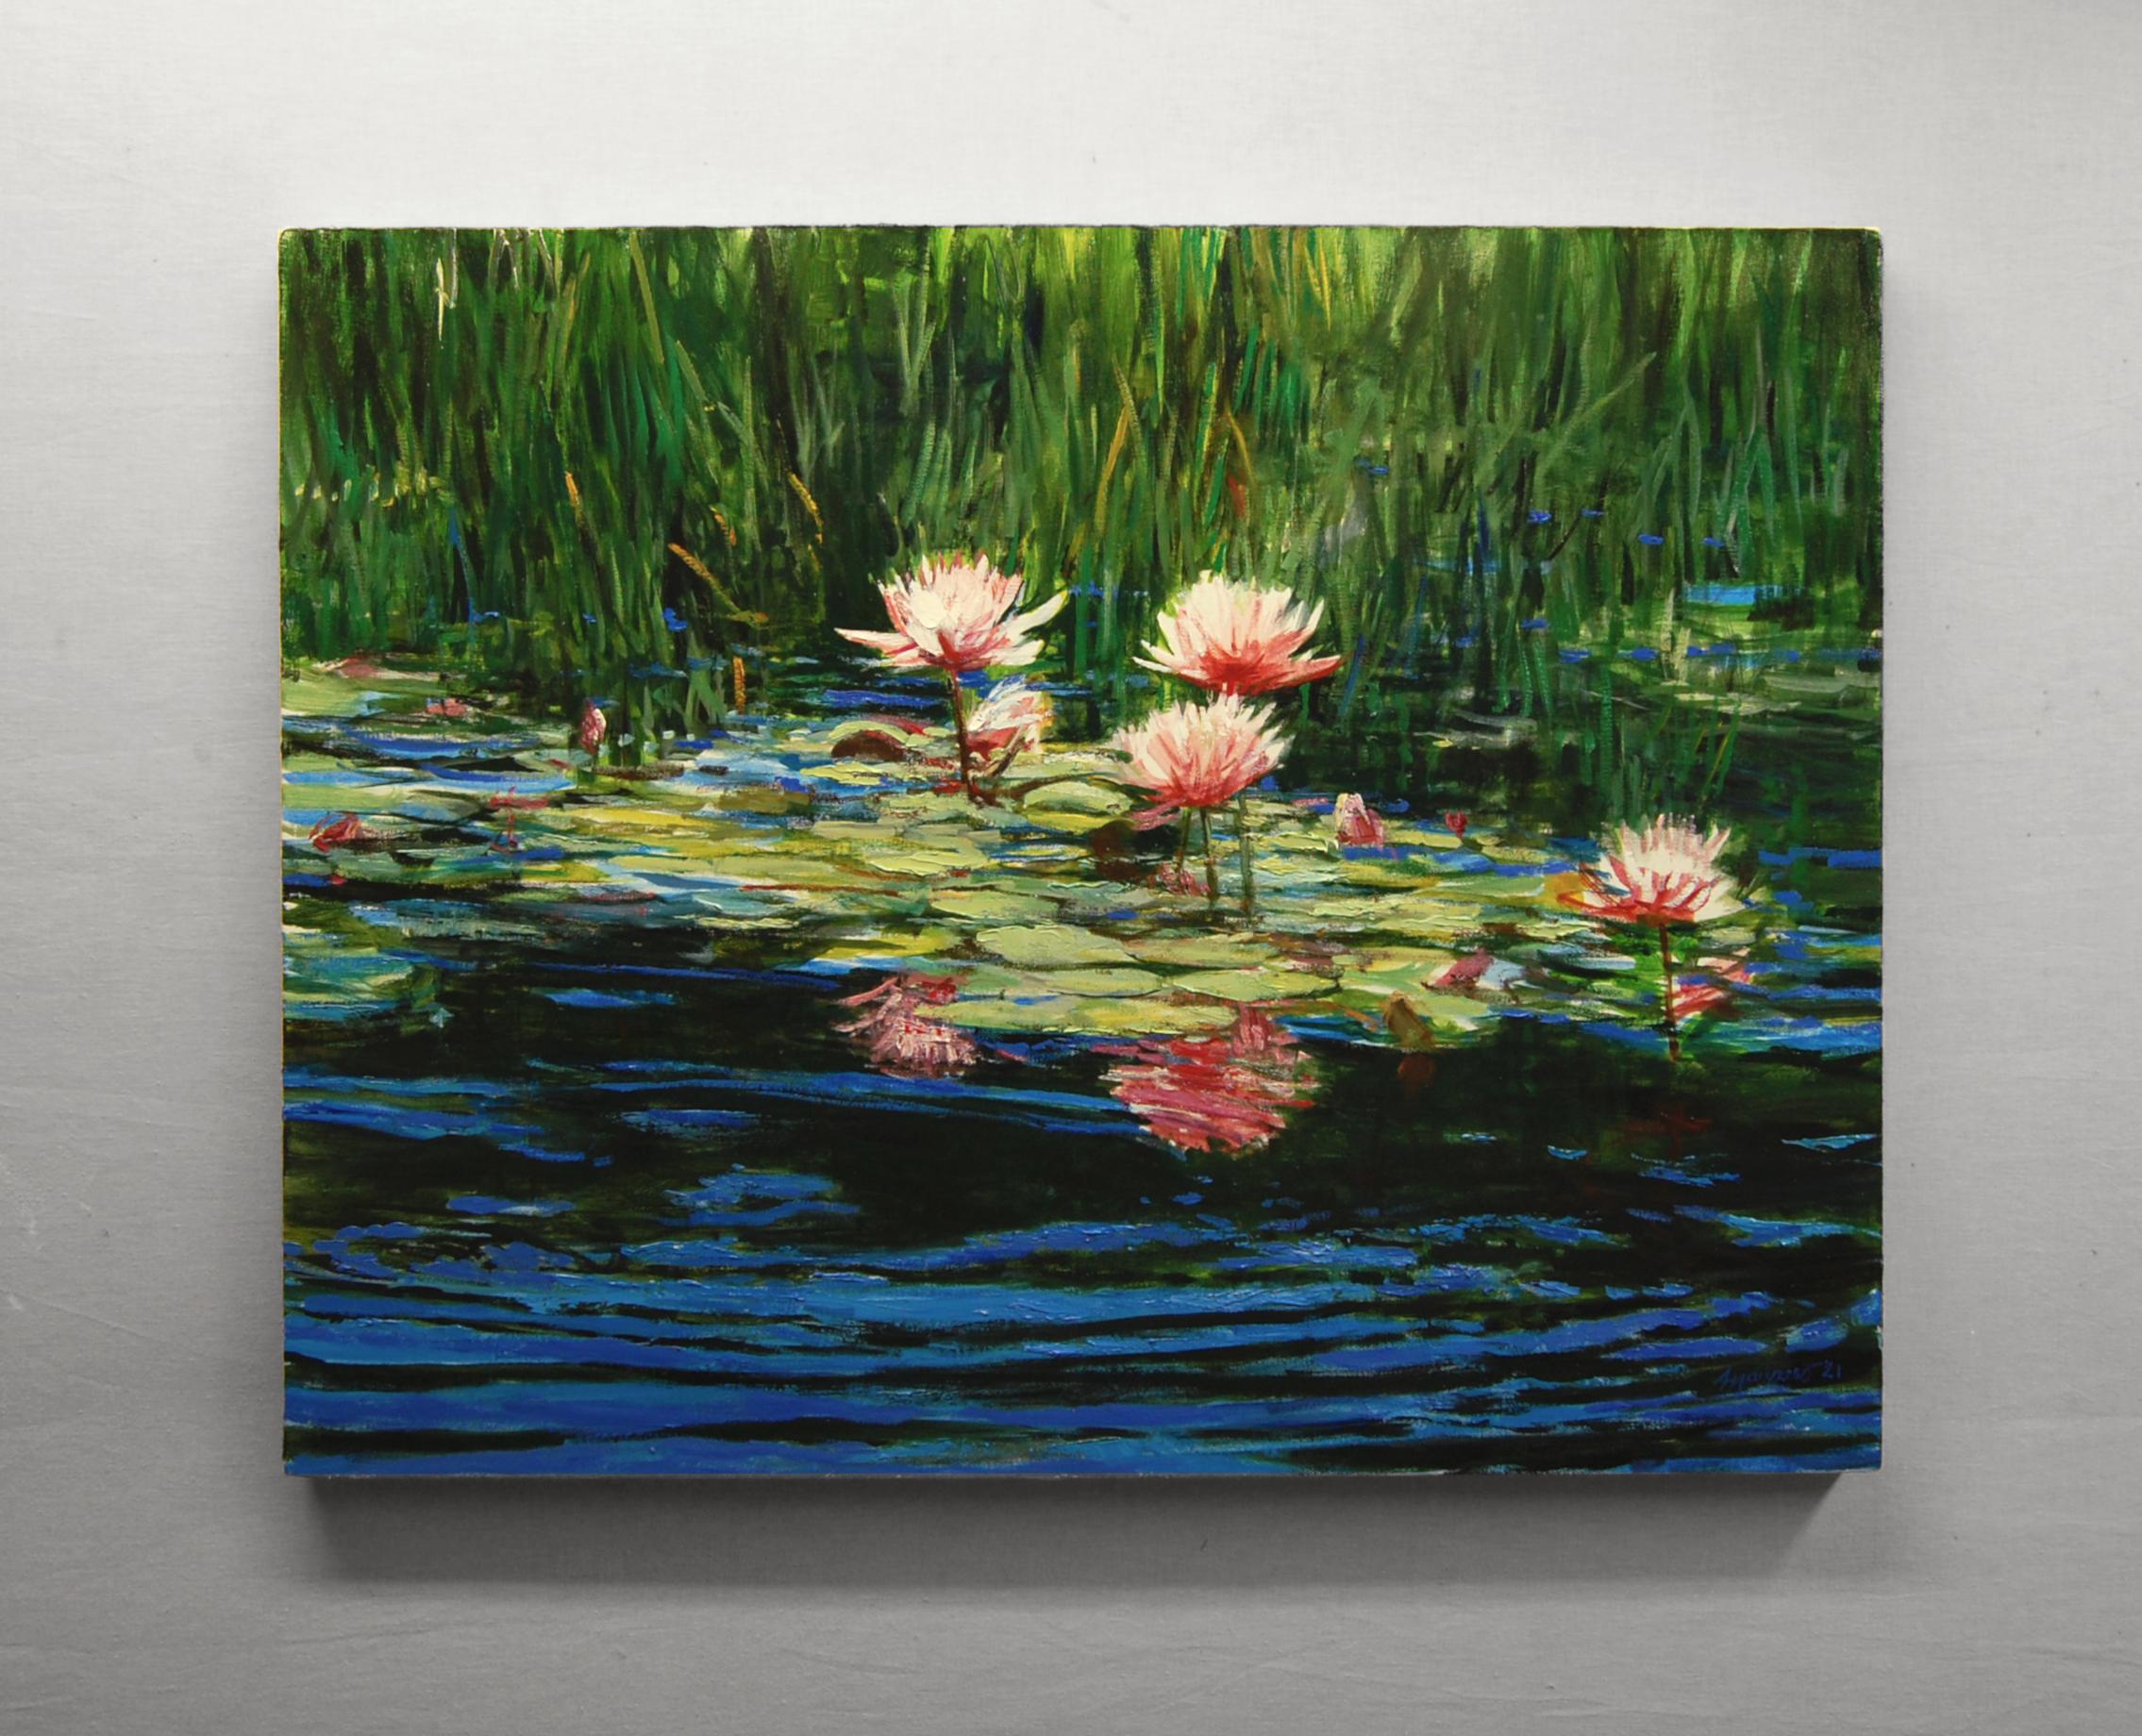 <p>Artist Comments<br />A lovely group of waterlilies flourishing near a ripple of shallow water enchanted artist Onelio Marrero. He regards himself as an avid observer of nature. He constantly looks at the world around him with curiosity and an